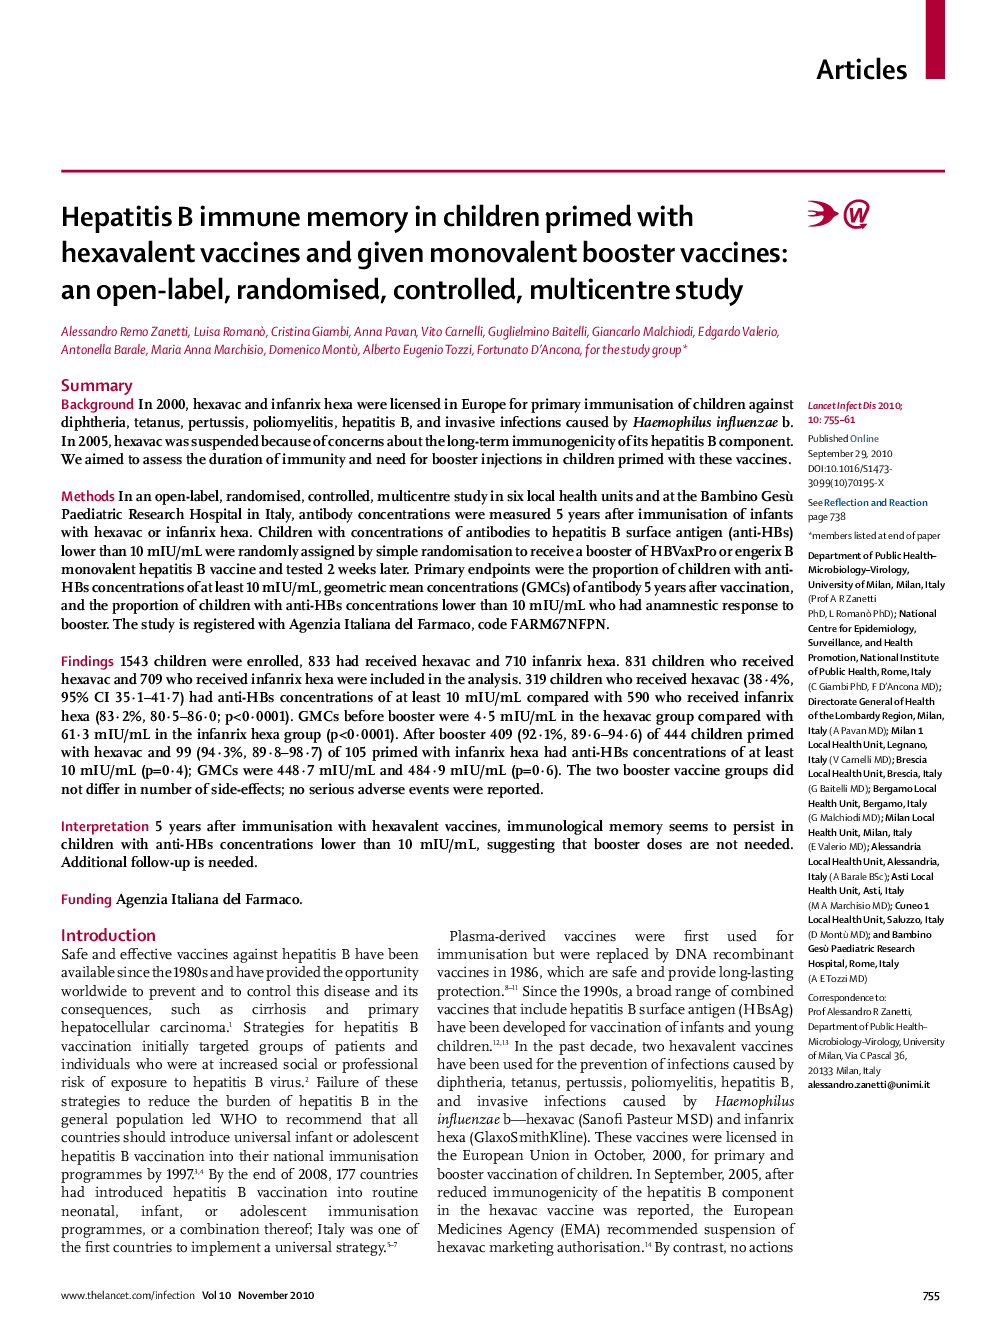 Hepatitis B immune memory in children primed with hexavalent vaccines and given monovalent booster vaccines: an open-label, randomised, controlled, multicentre study